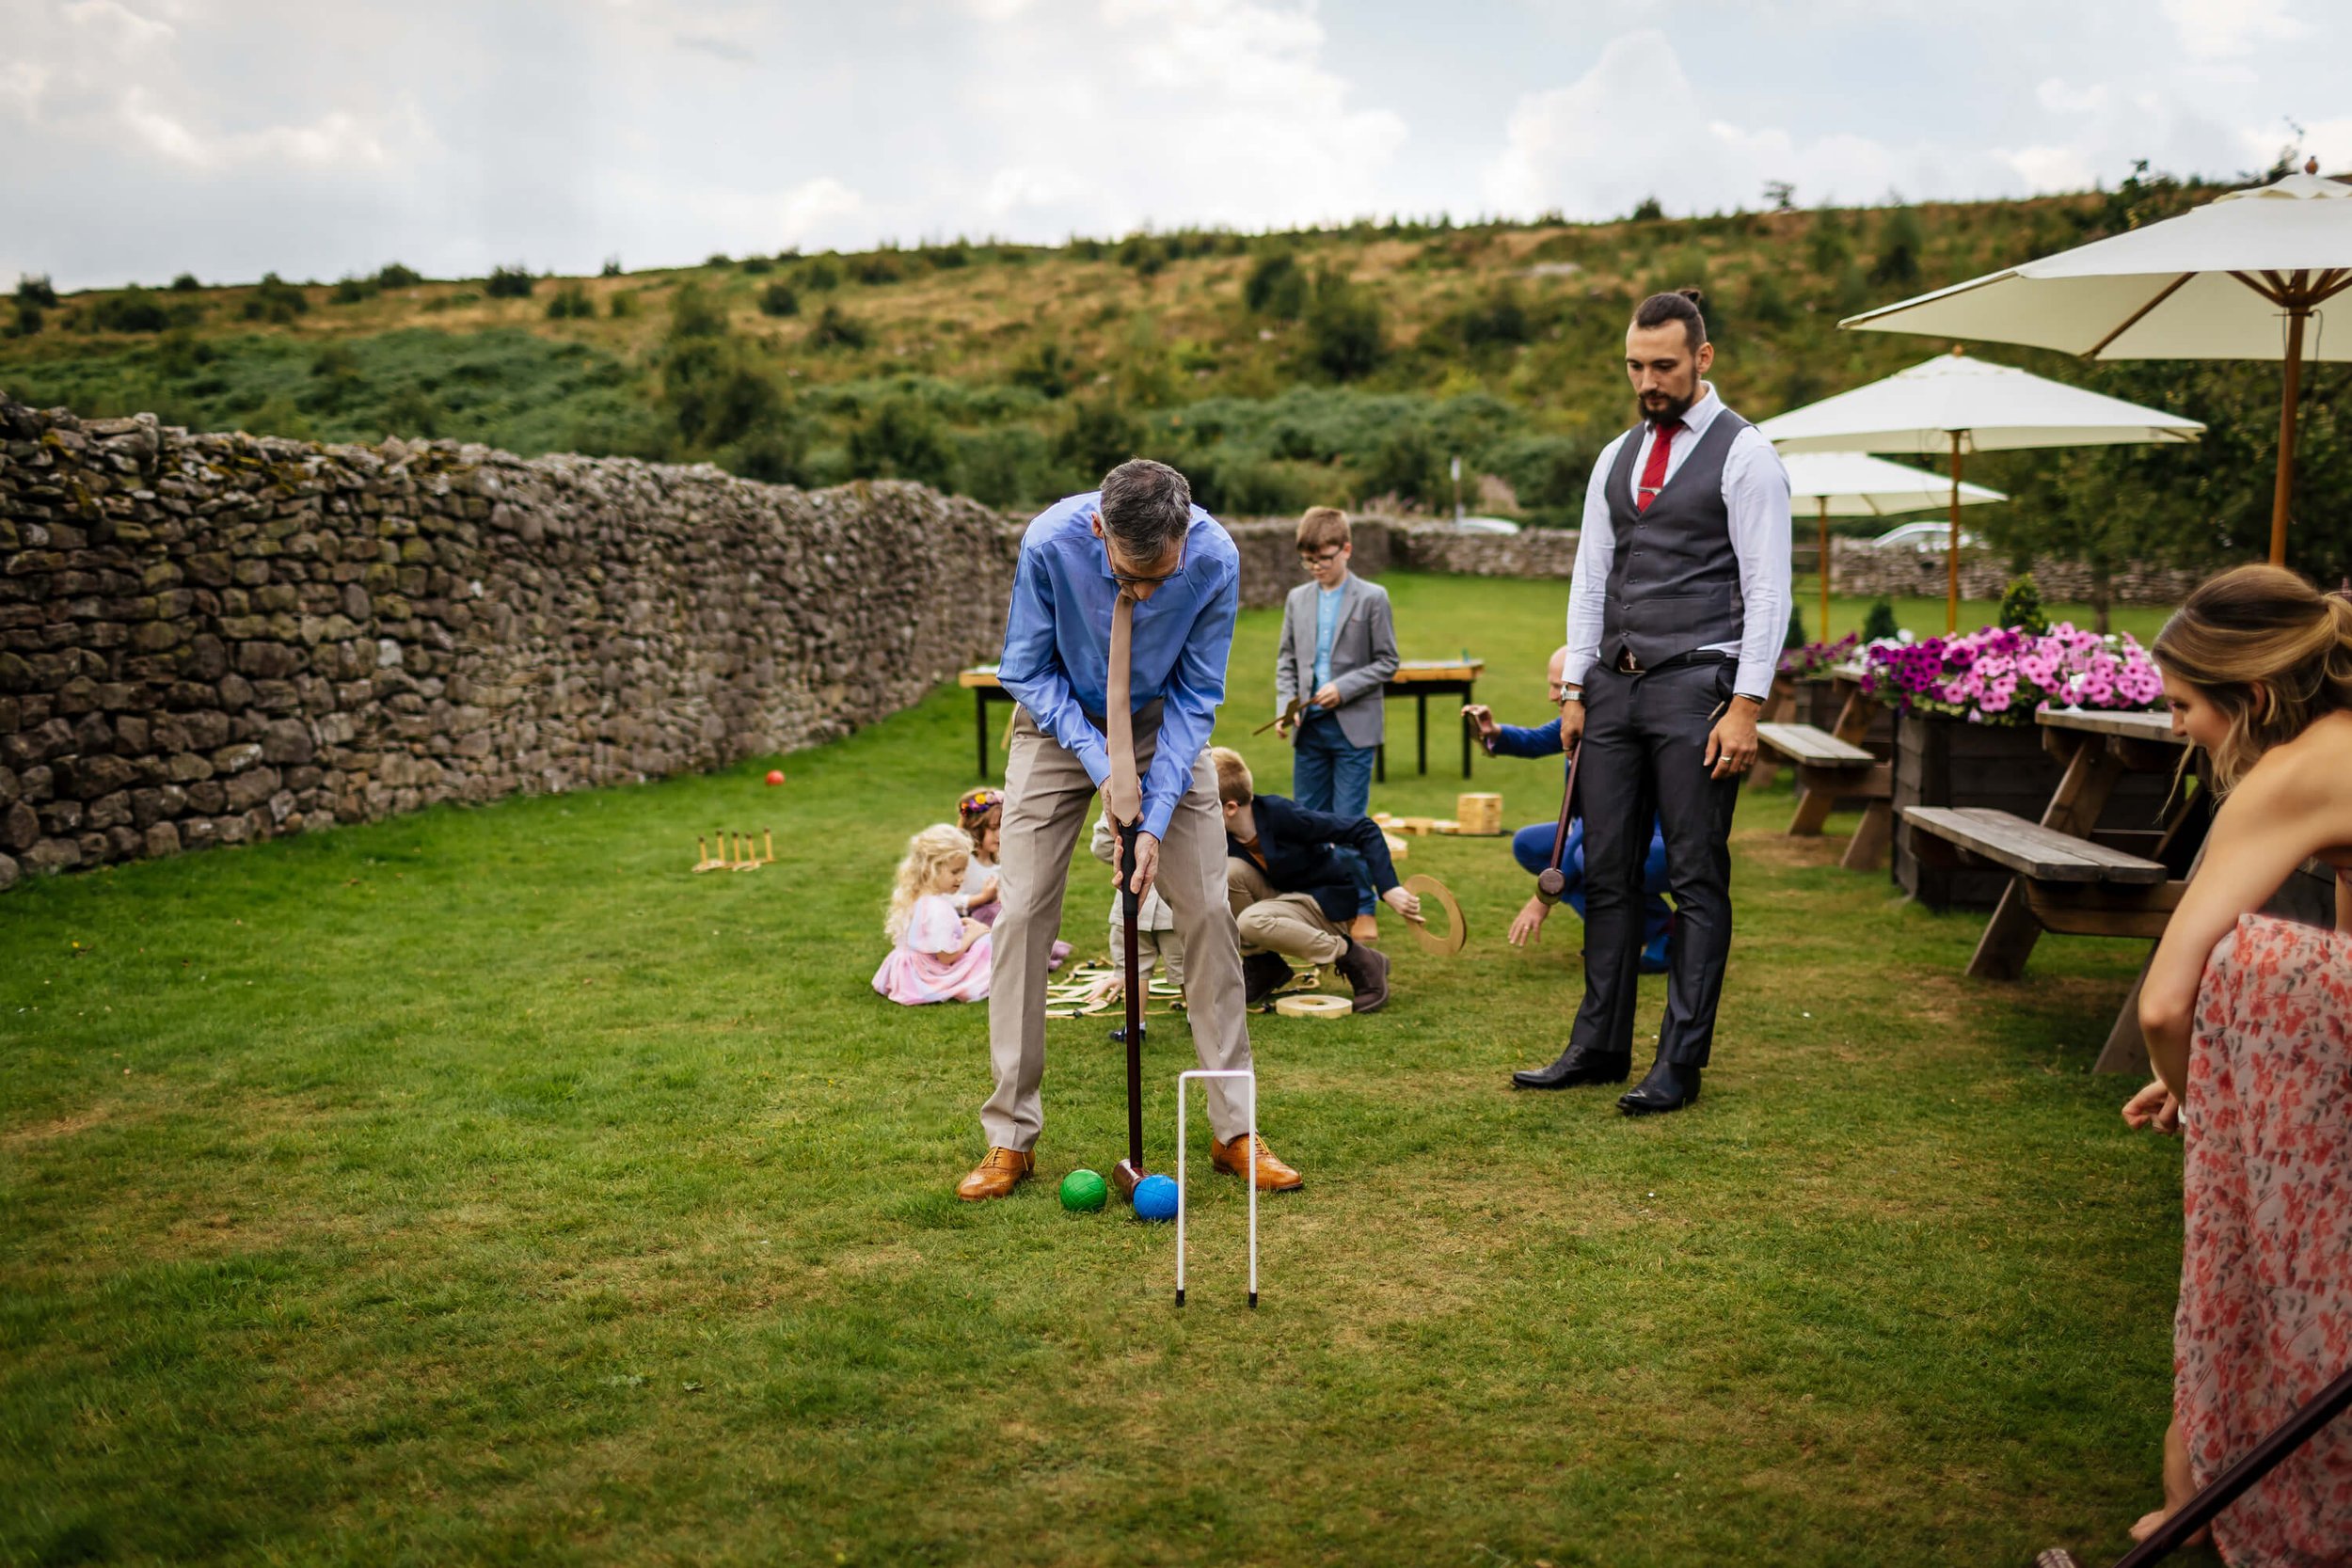 Wedding guests playing croquet on the lawn at a Yorkshire wedding